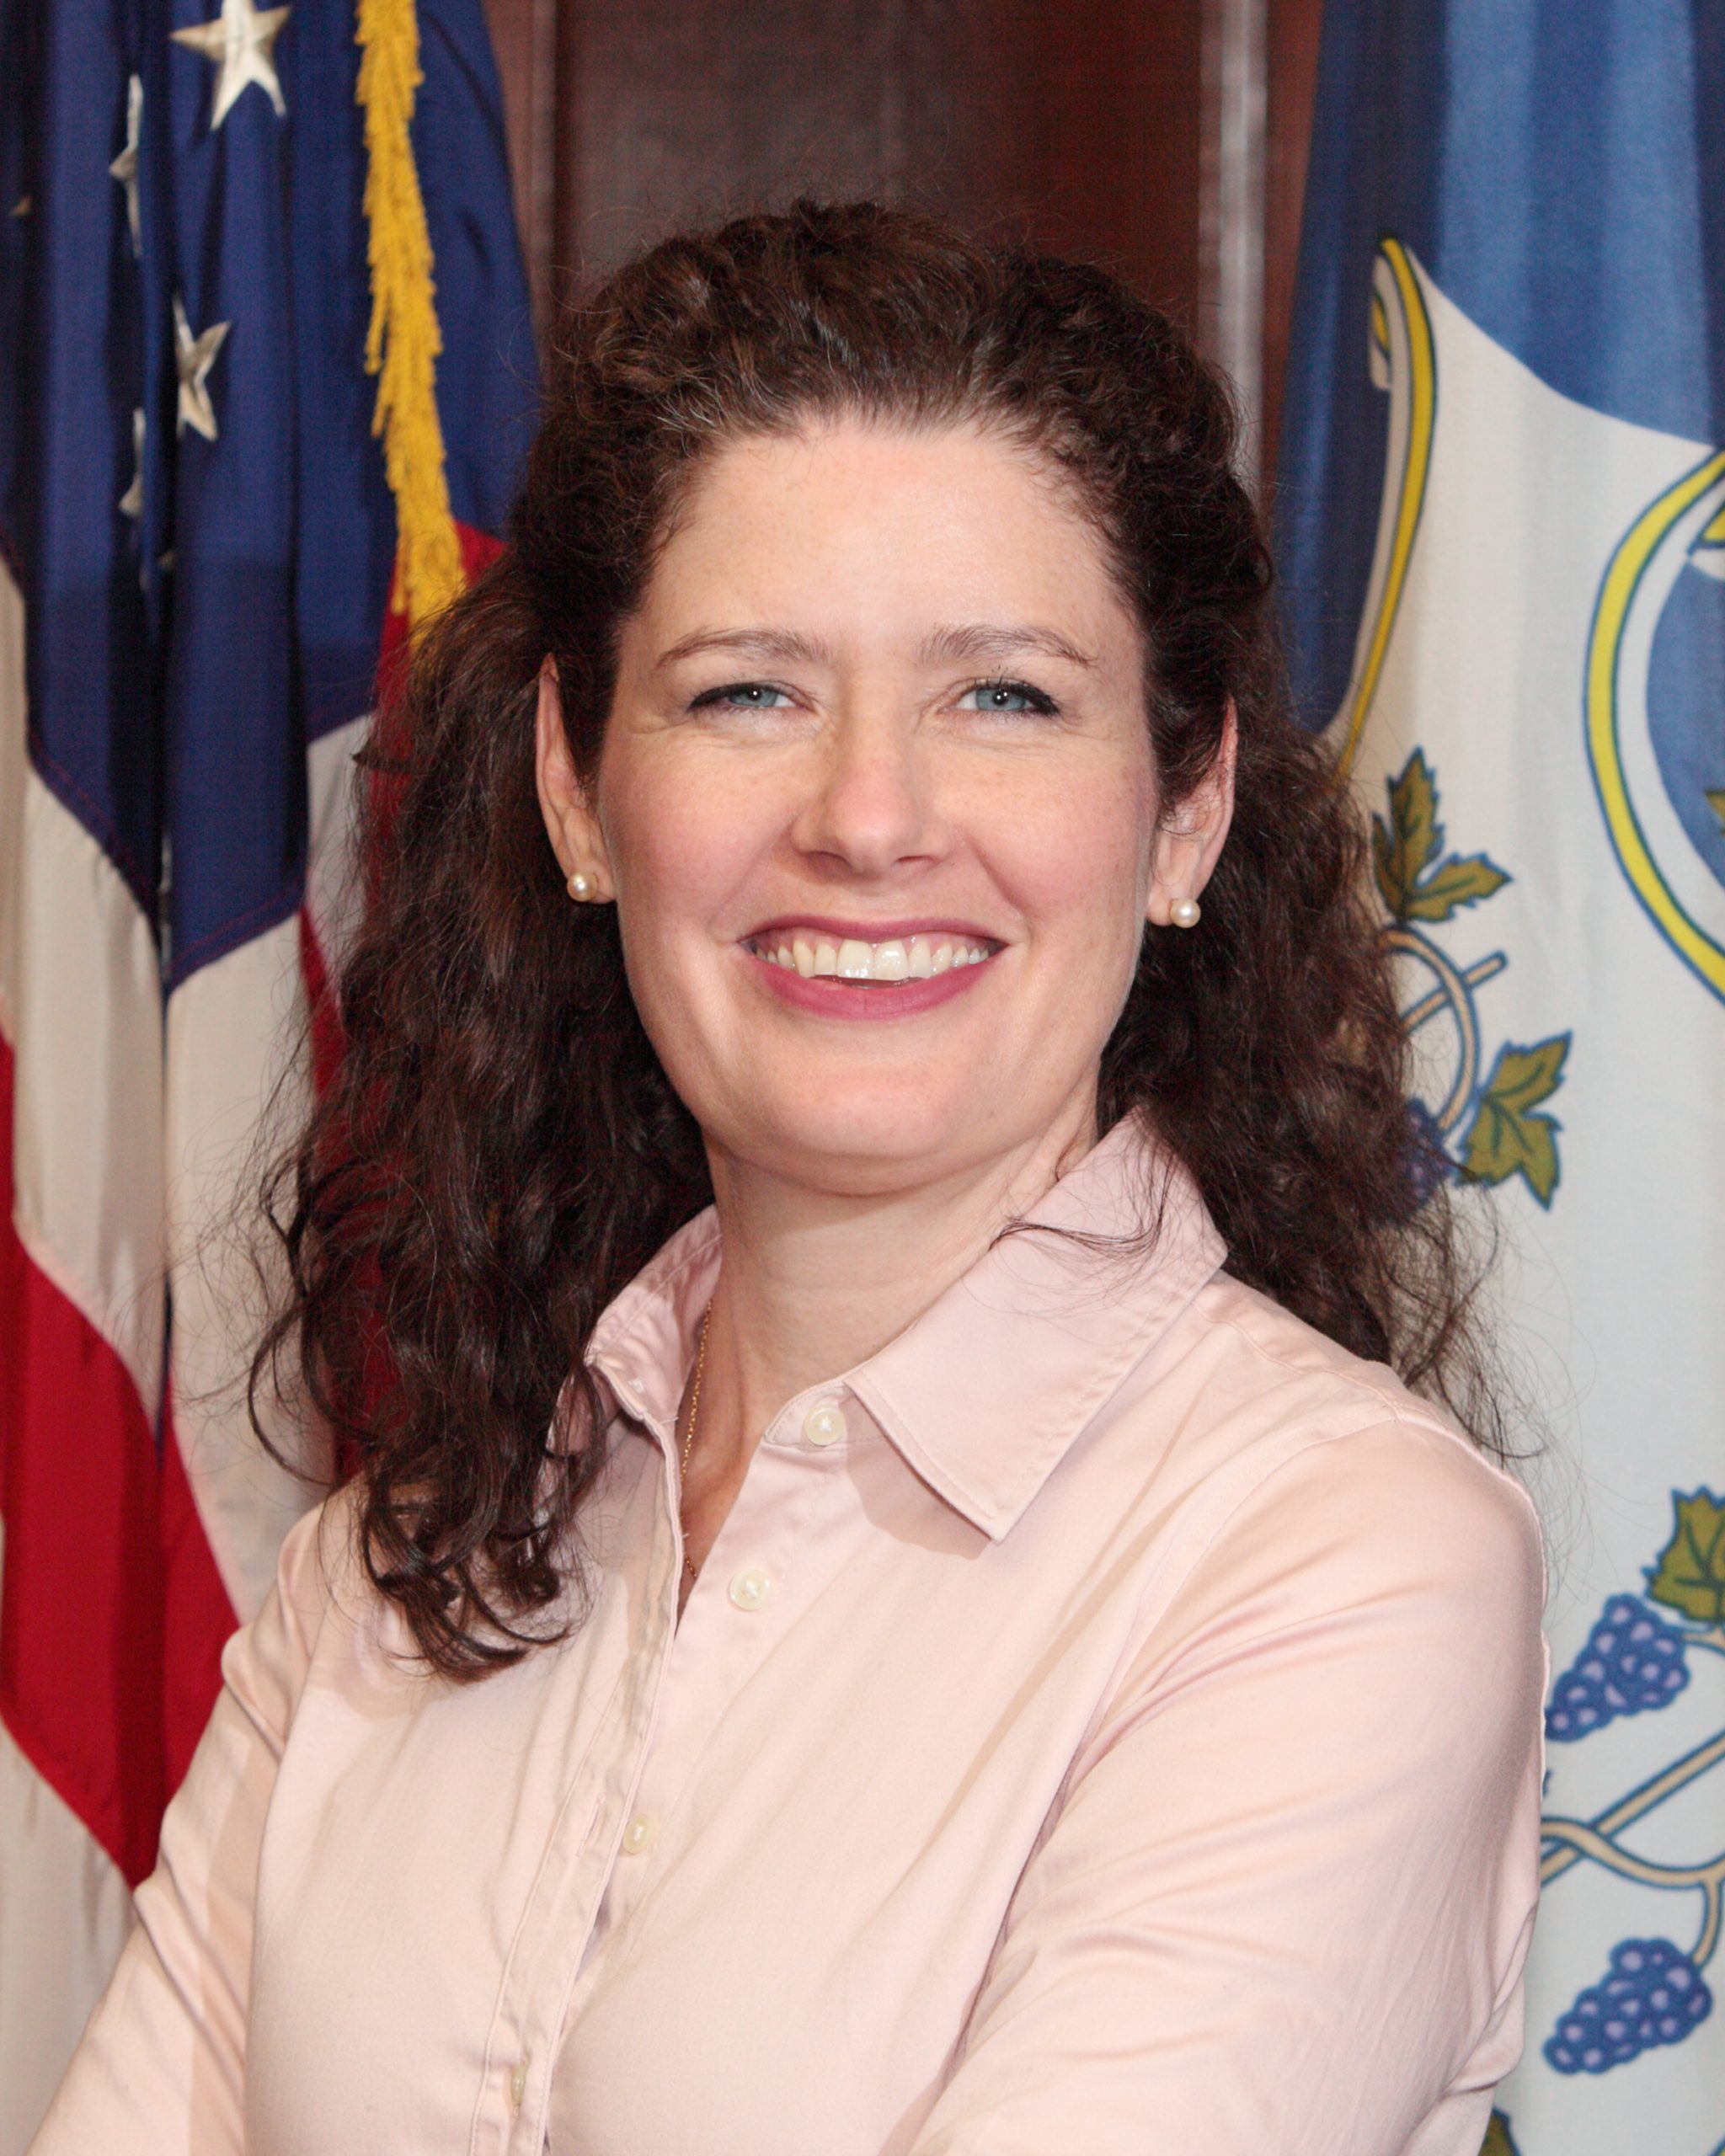 Katie Dykes is the Commissioner of Connecticut’s Department of Energy & Environmental Protection (DEEP)